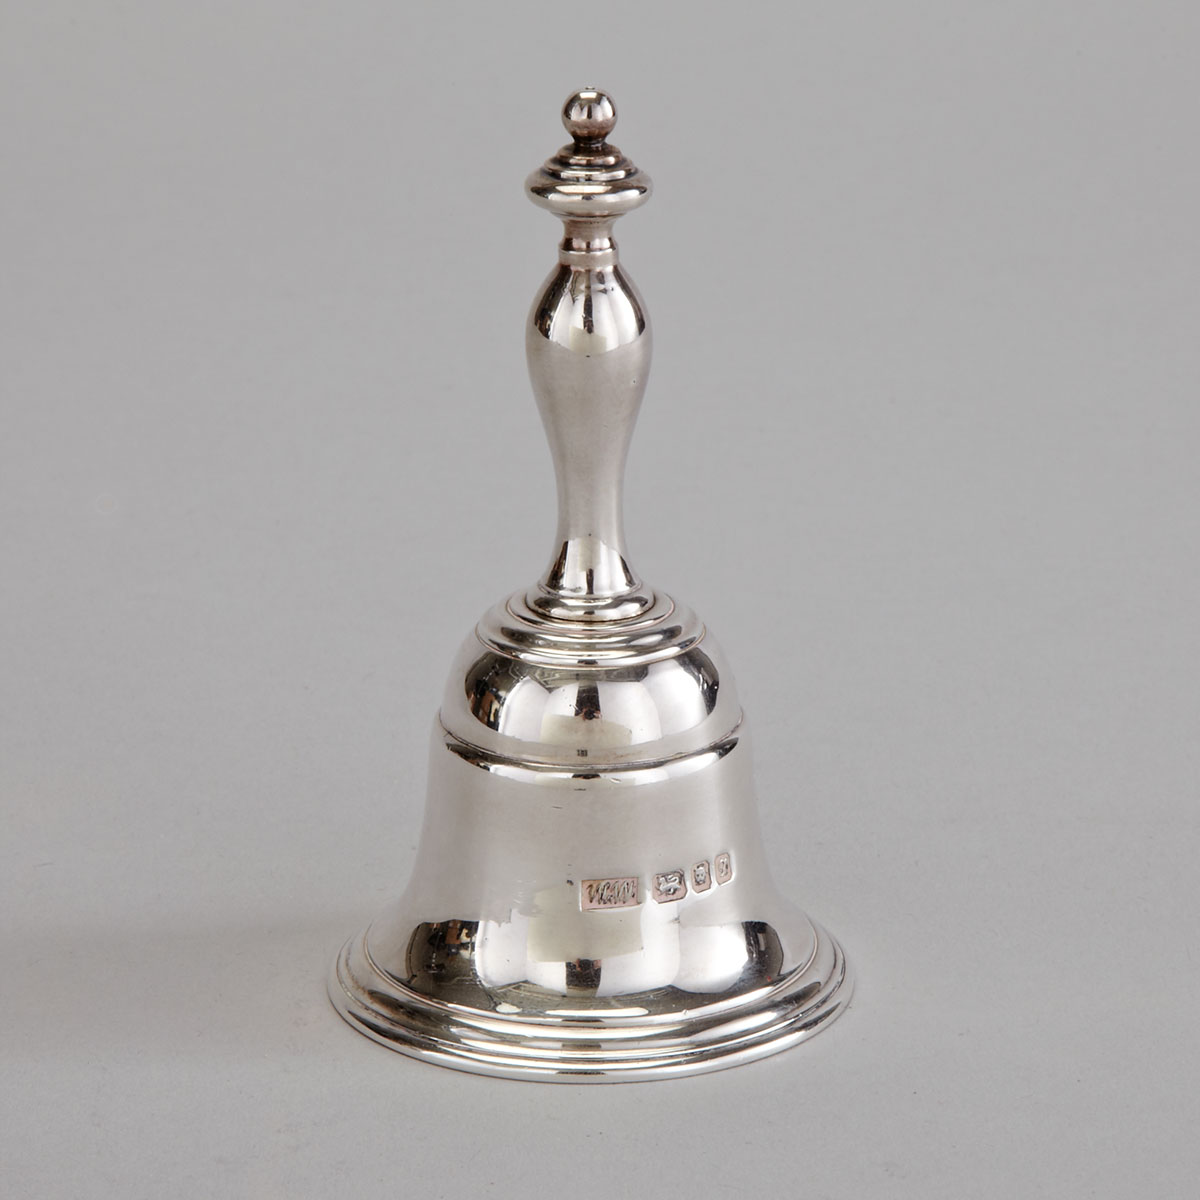 English Silver Table Bell, Walter Wilson, London, 1962